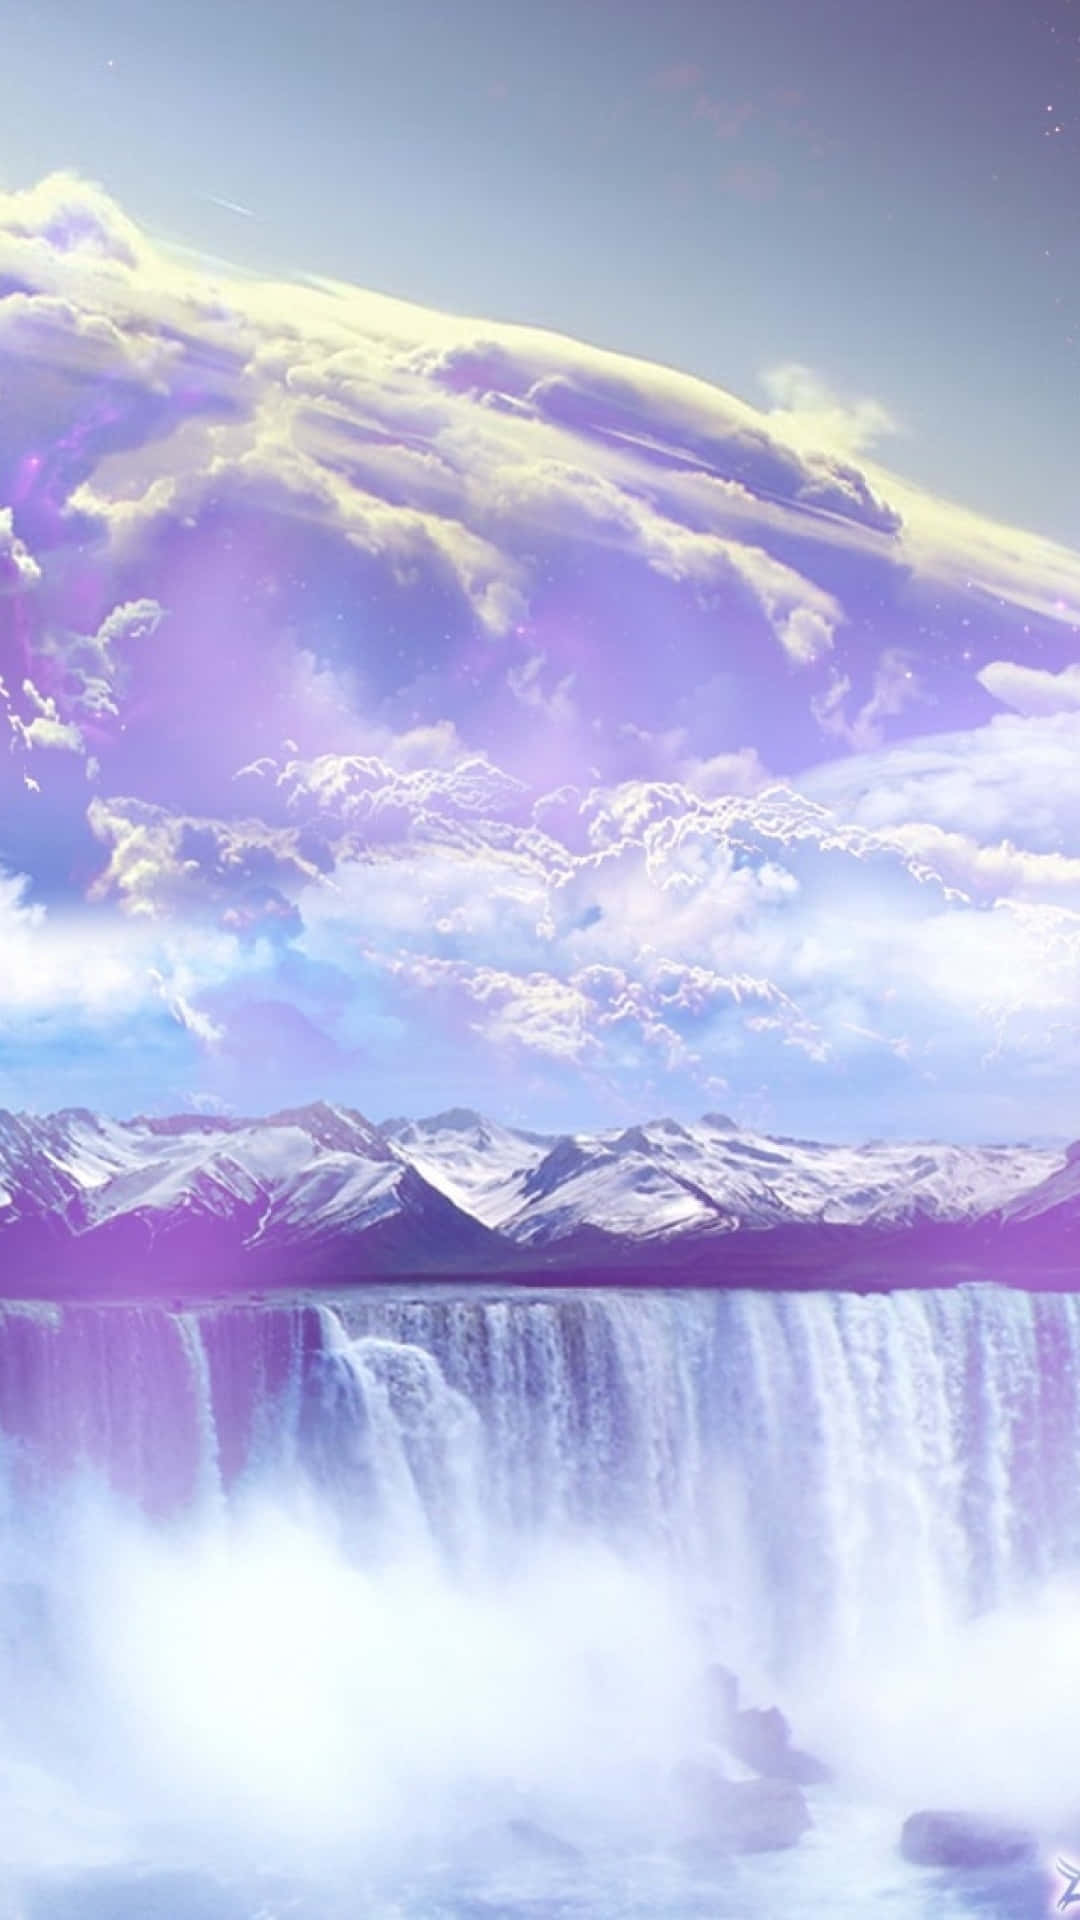 A Purple Waterfall With Clouds And Mountains Wallpaper